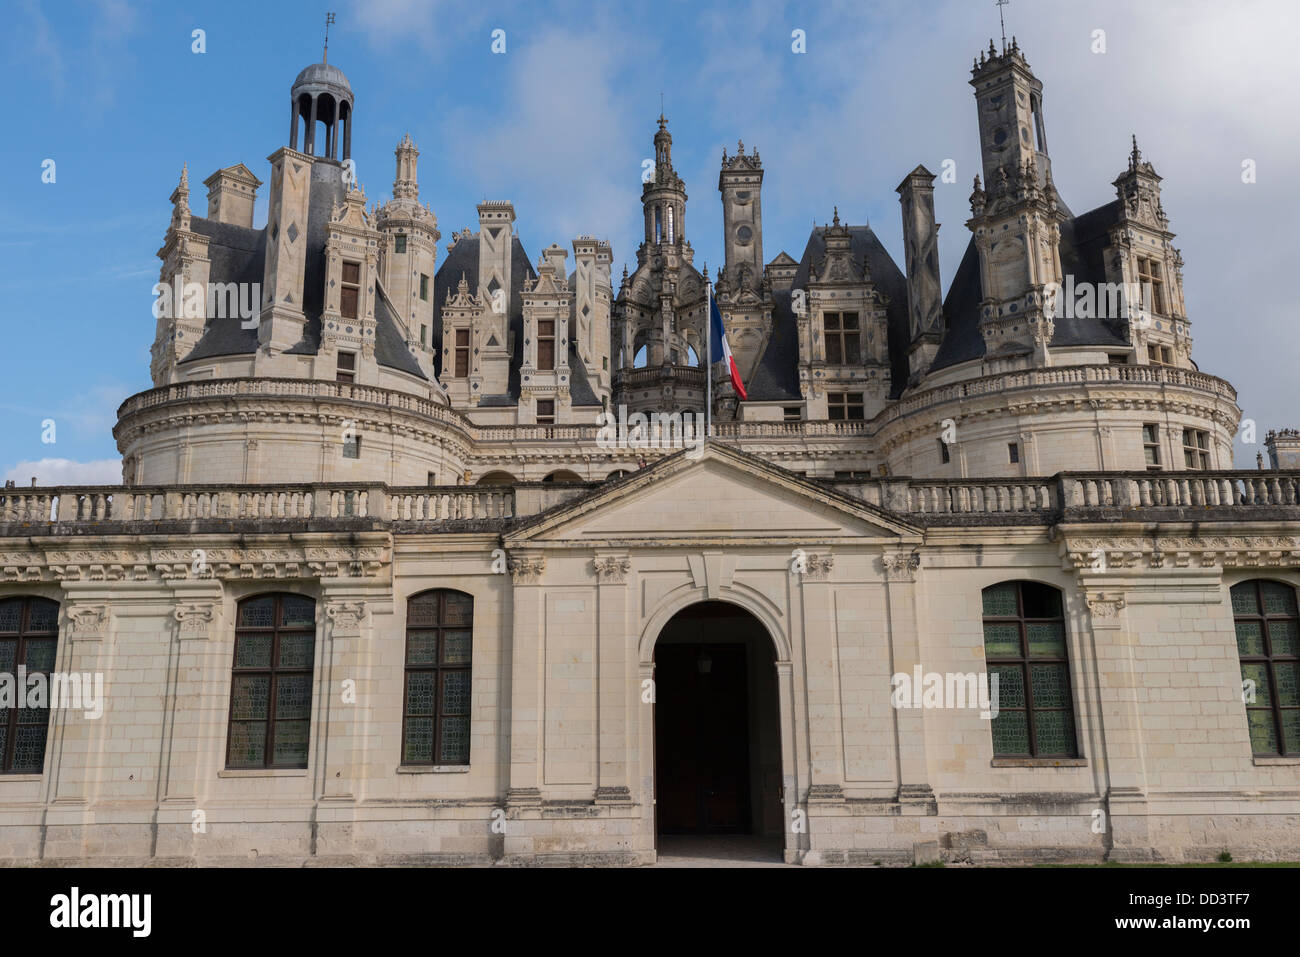 Chateau de Chambord, view from terrace roof on courtyard with terrace, in  Loire valley, Centre Valle de Loire in France Stock Photo - Alamy